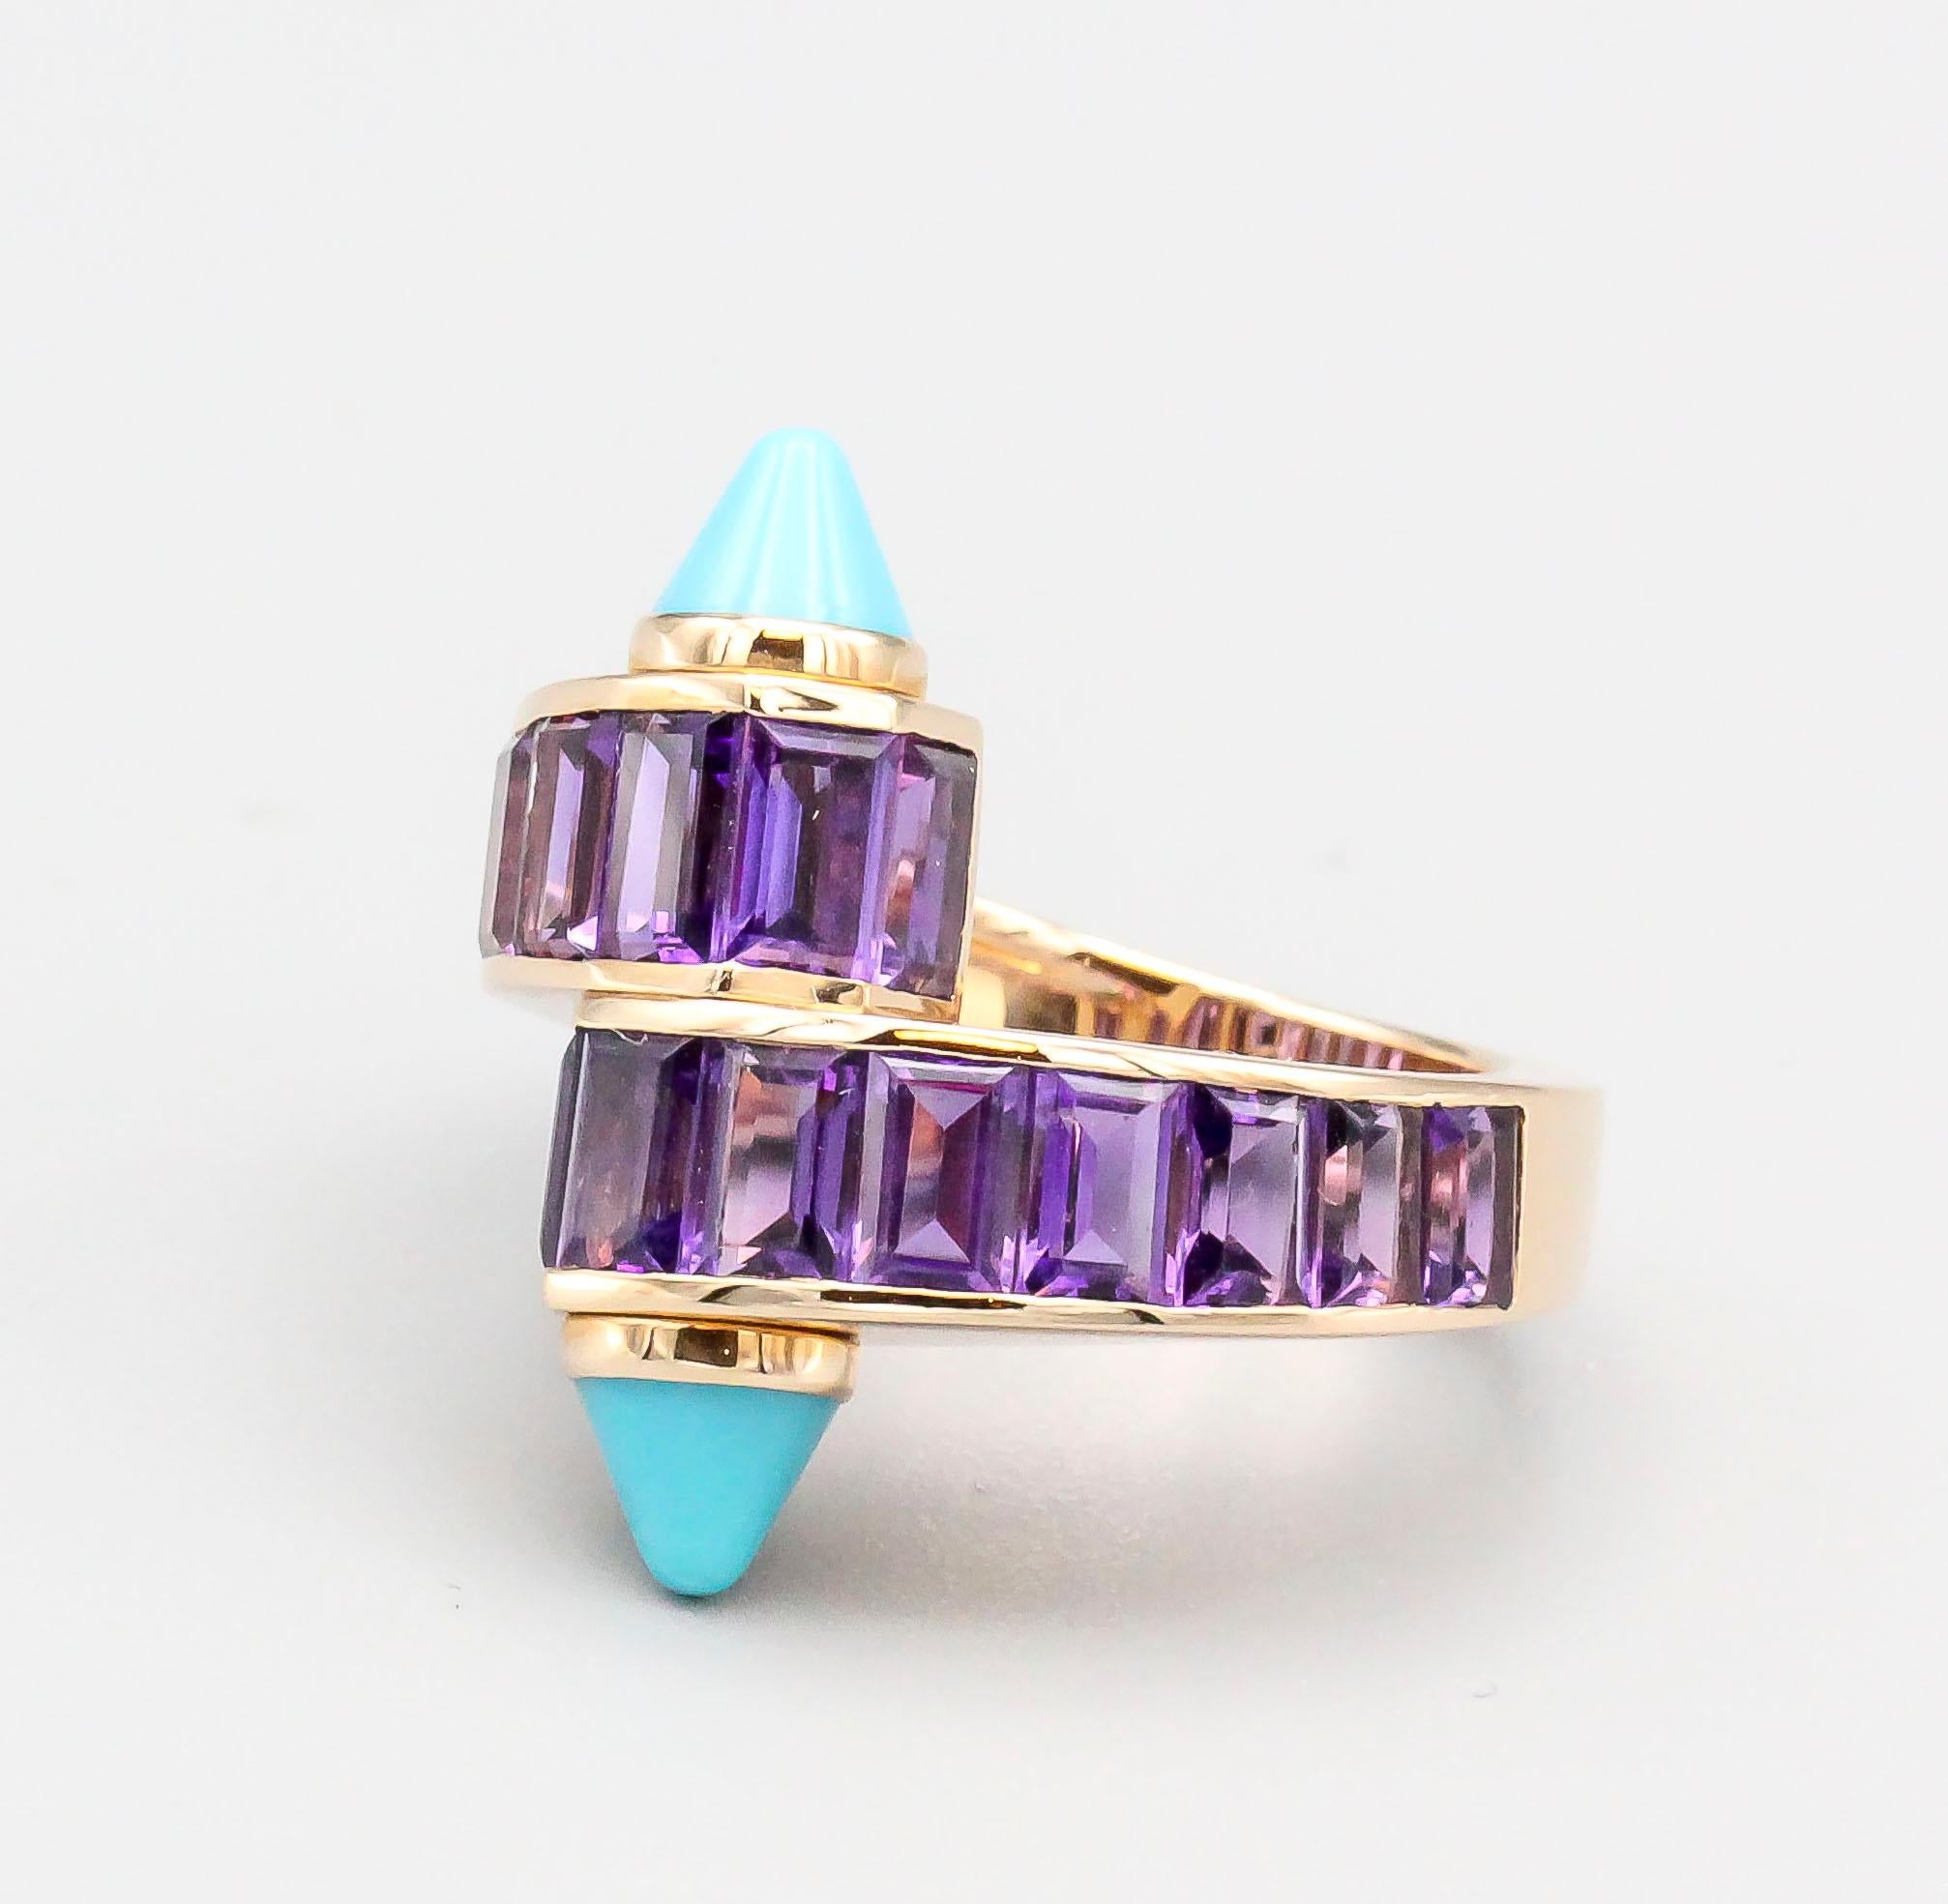 Fine and rare 18k rose gold ring channel set with amethysts and further accented by turquoise, by Cartier circa 21st Century.  European size 51, approx. US size 5.5.

Hallmarks:  Cartier, French 18k gold assay marks, maker's mark, reference numbers,